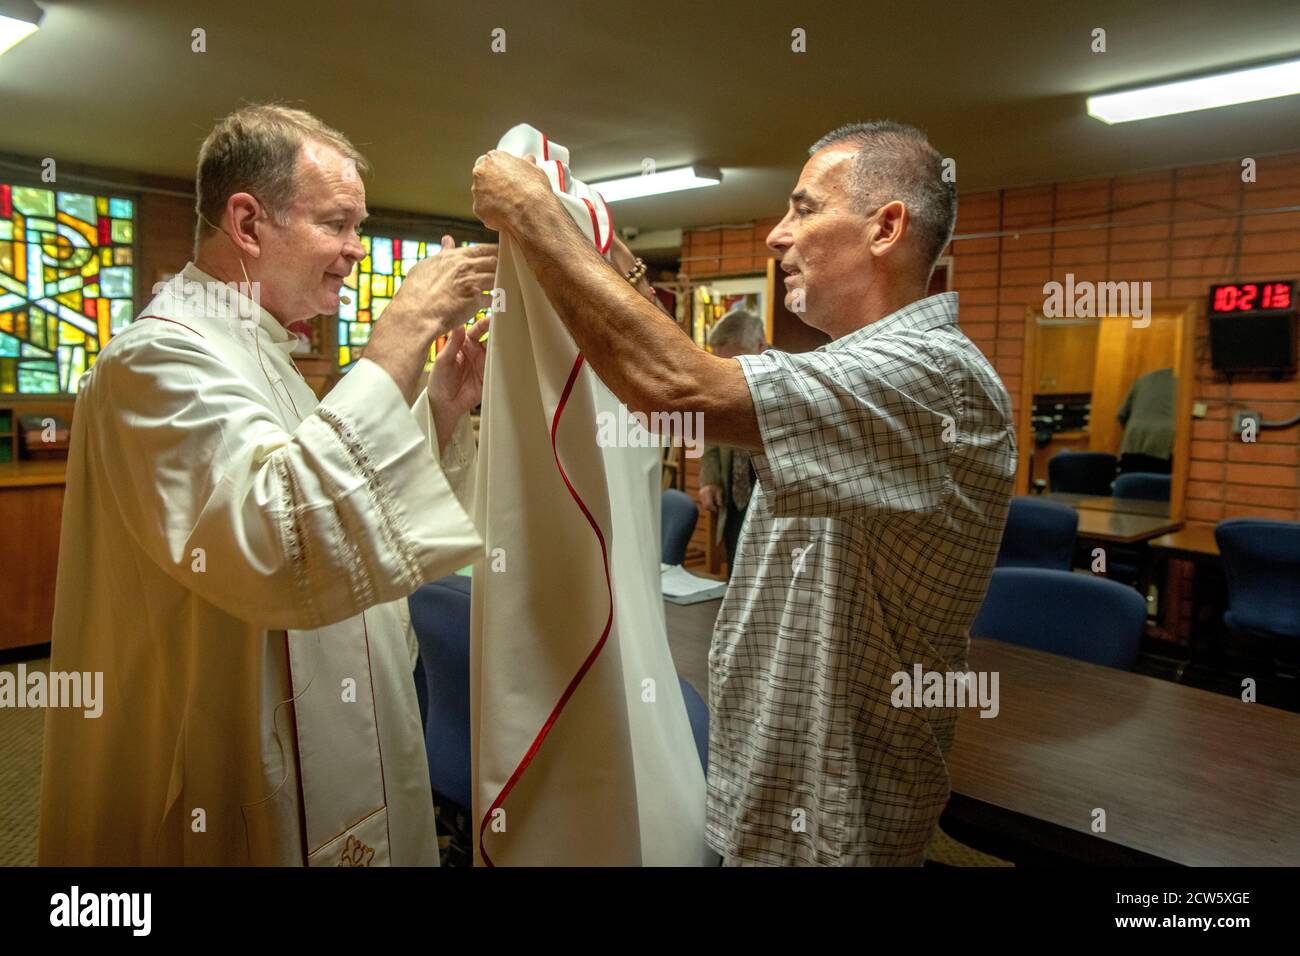 The deacon of a Southern California Catholic church helps to dress his priest in ceremonial vestments before mass. Stock Photo